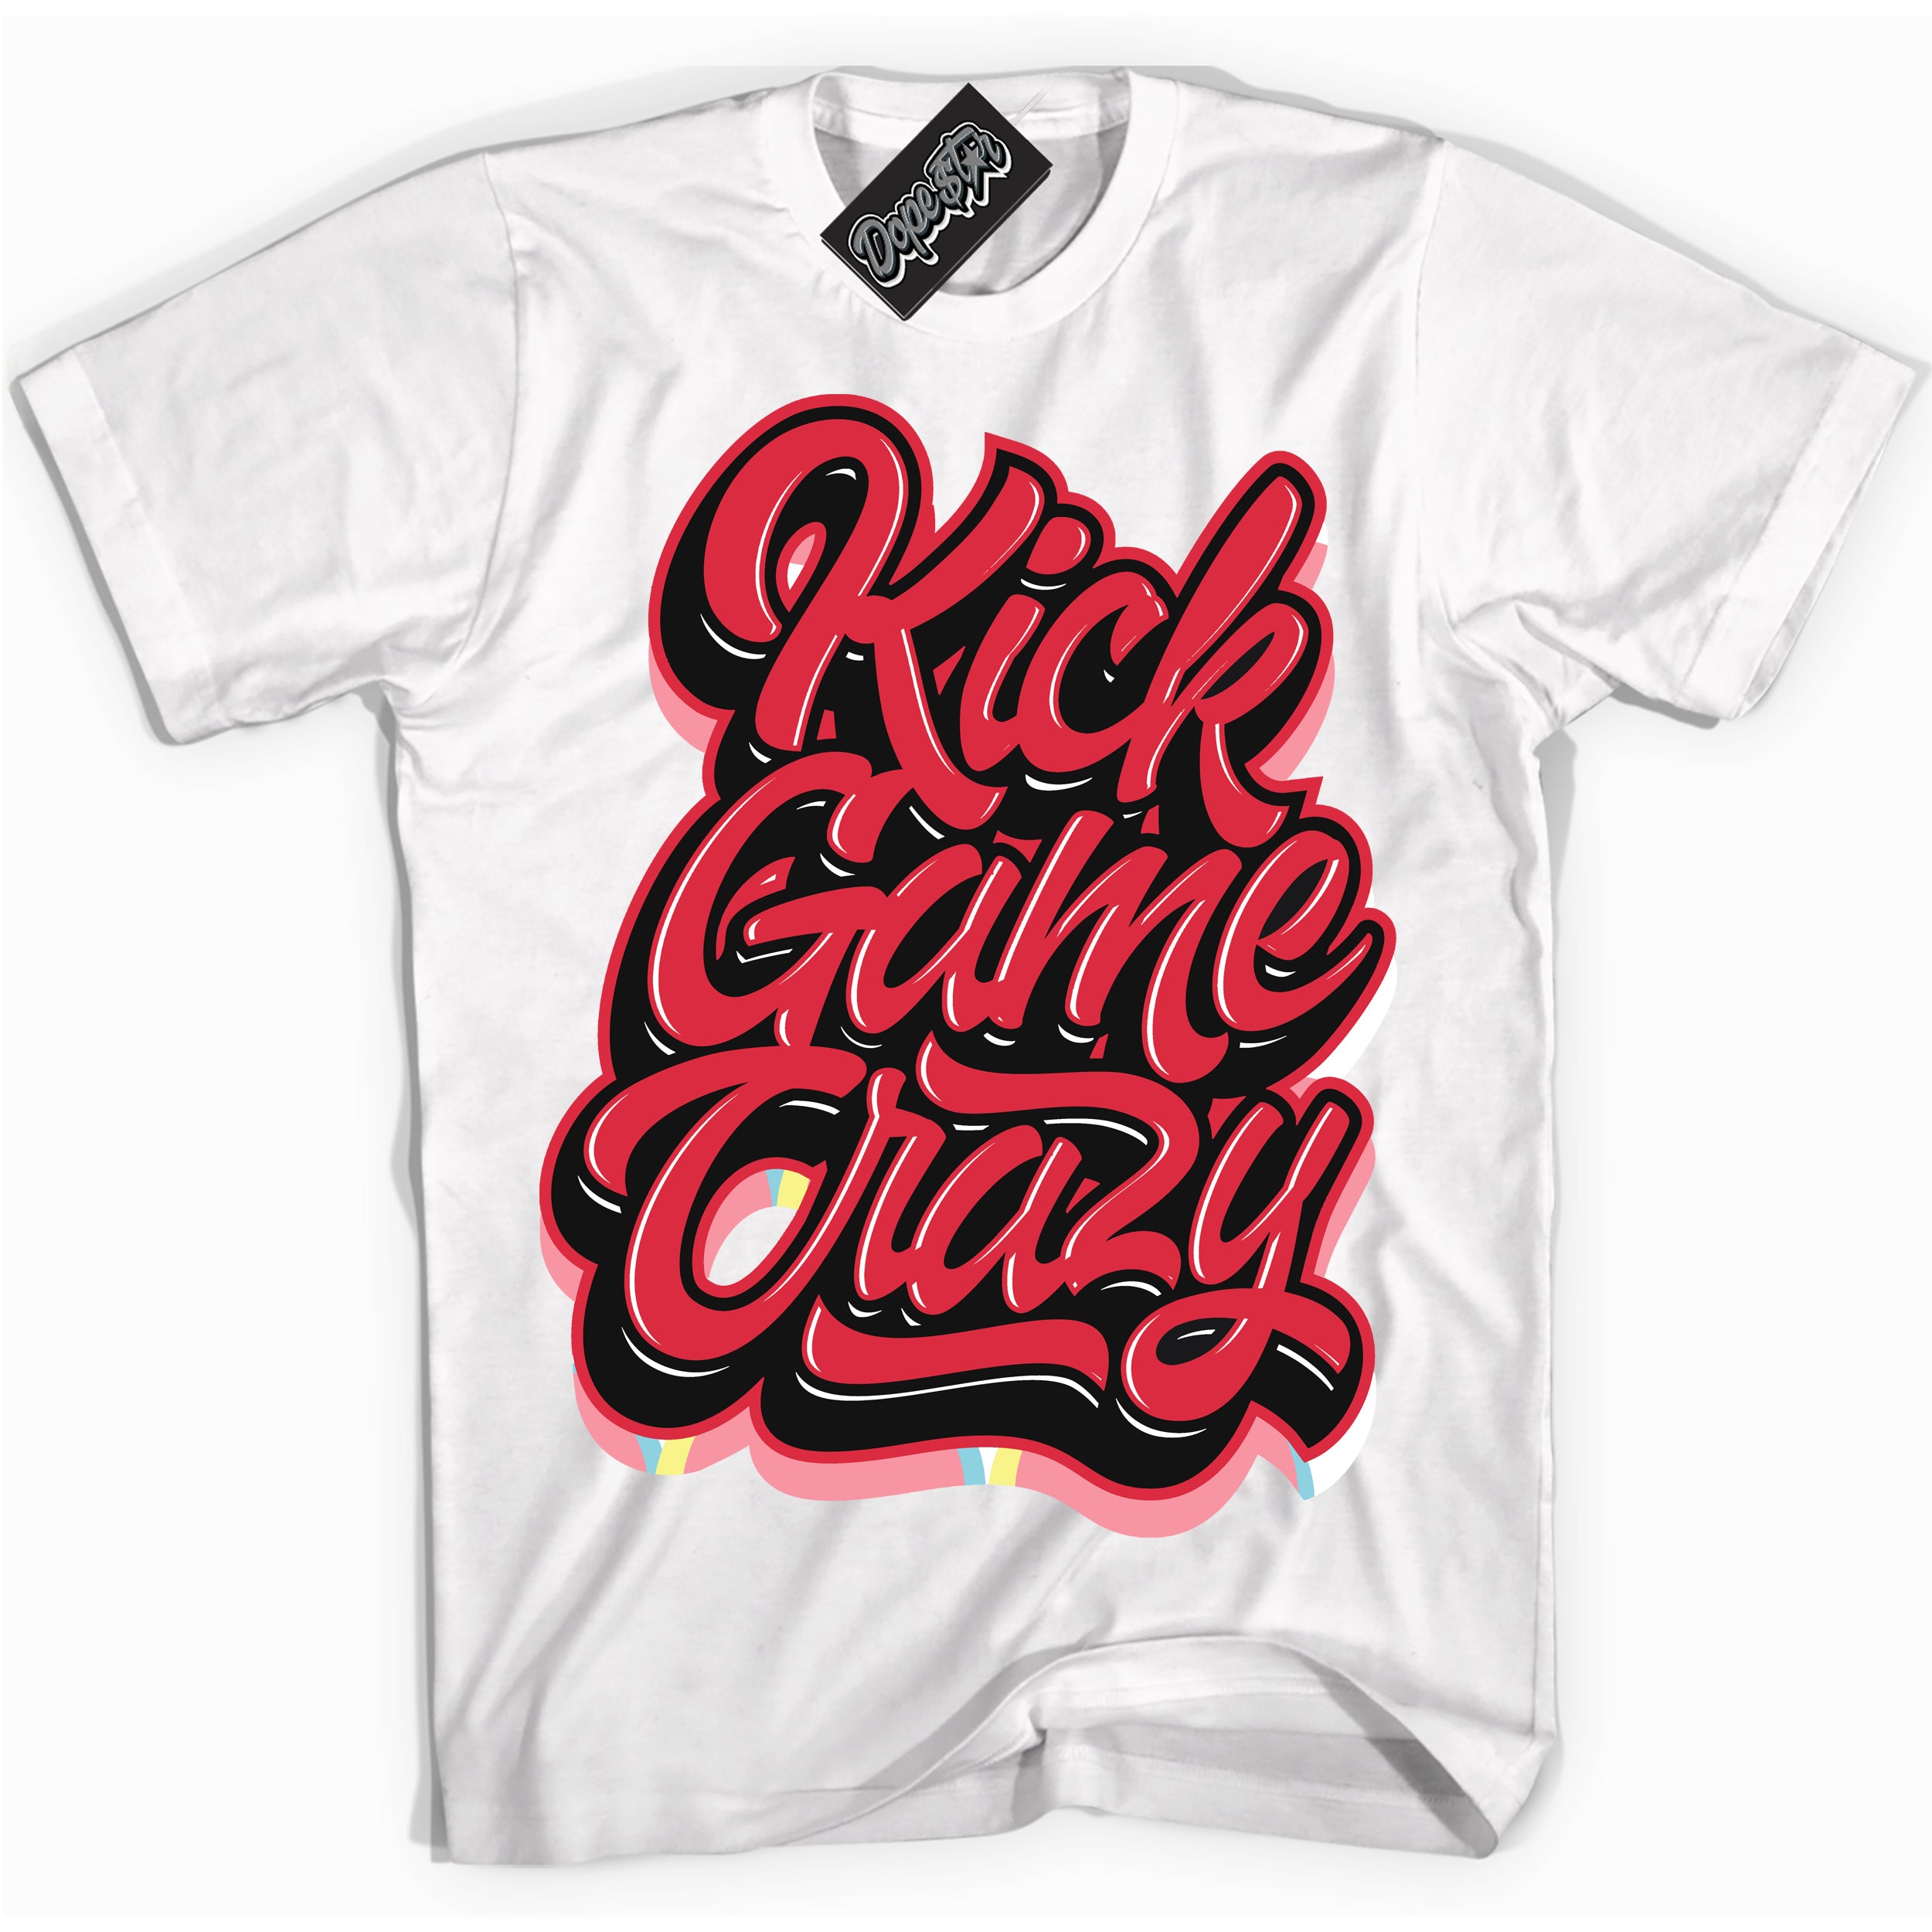 Cool White graphic tee with “ Kick Game Crazy ” design, that perfectly matches Spider-Verse 1s sneakers 